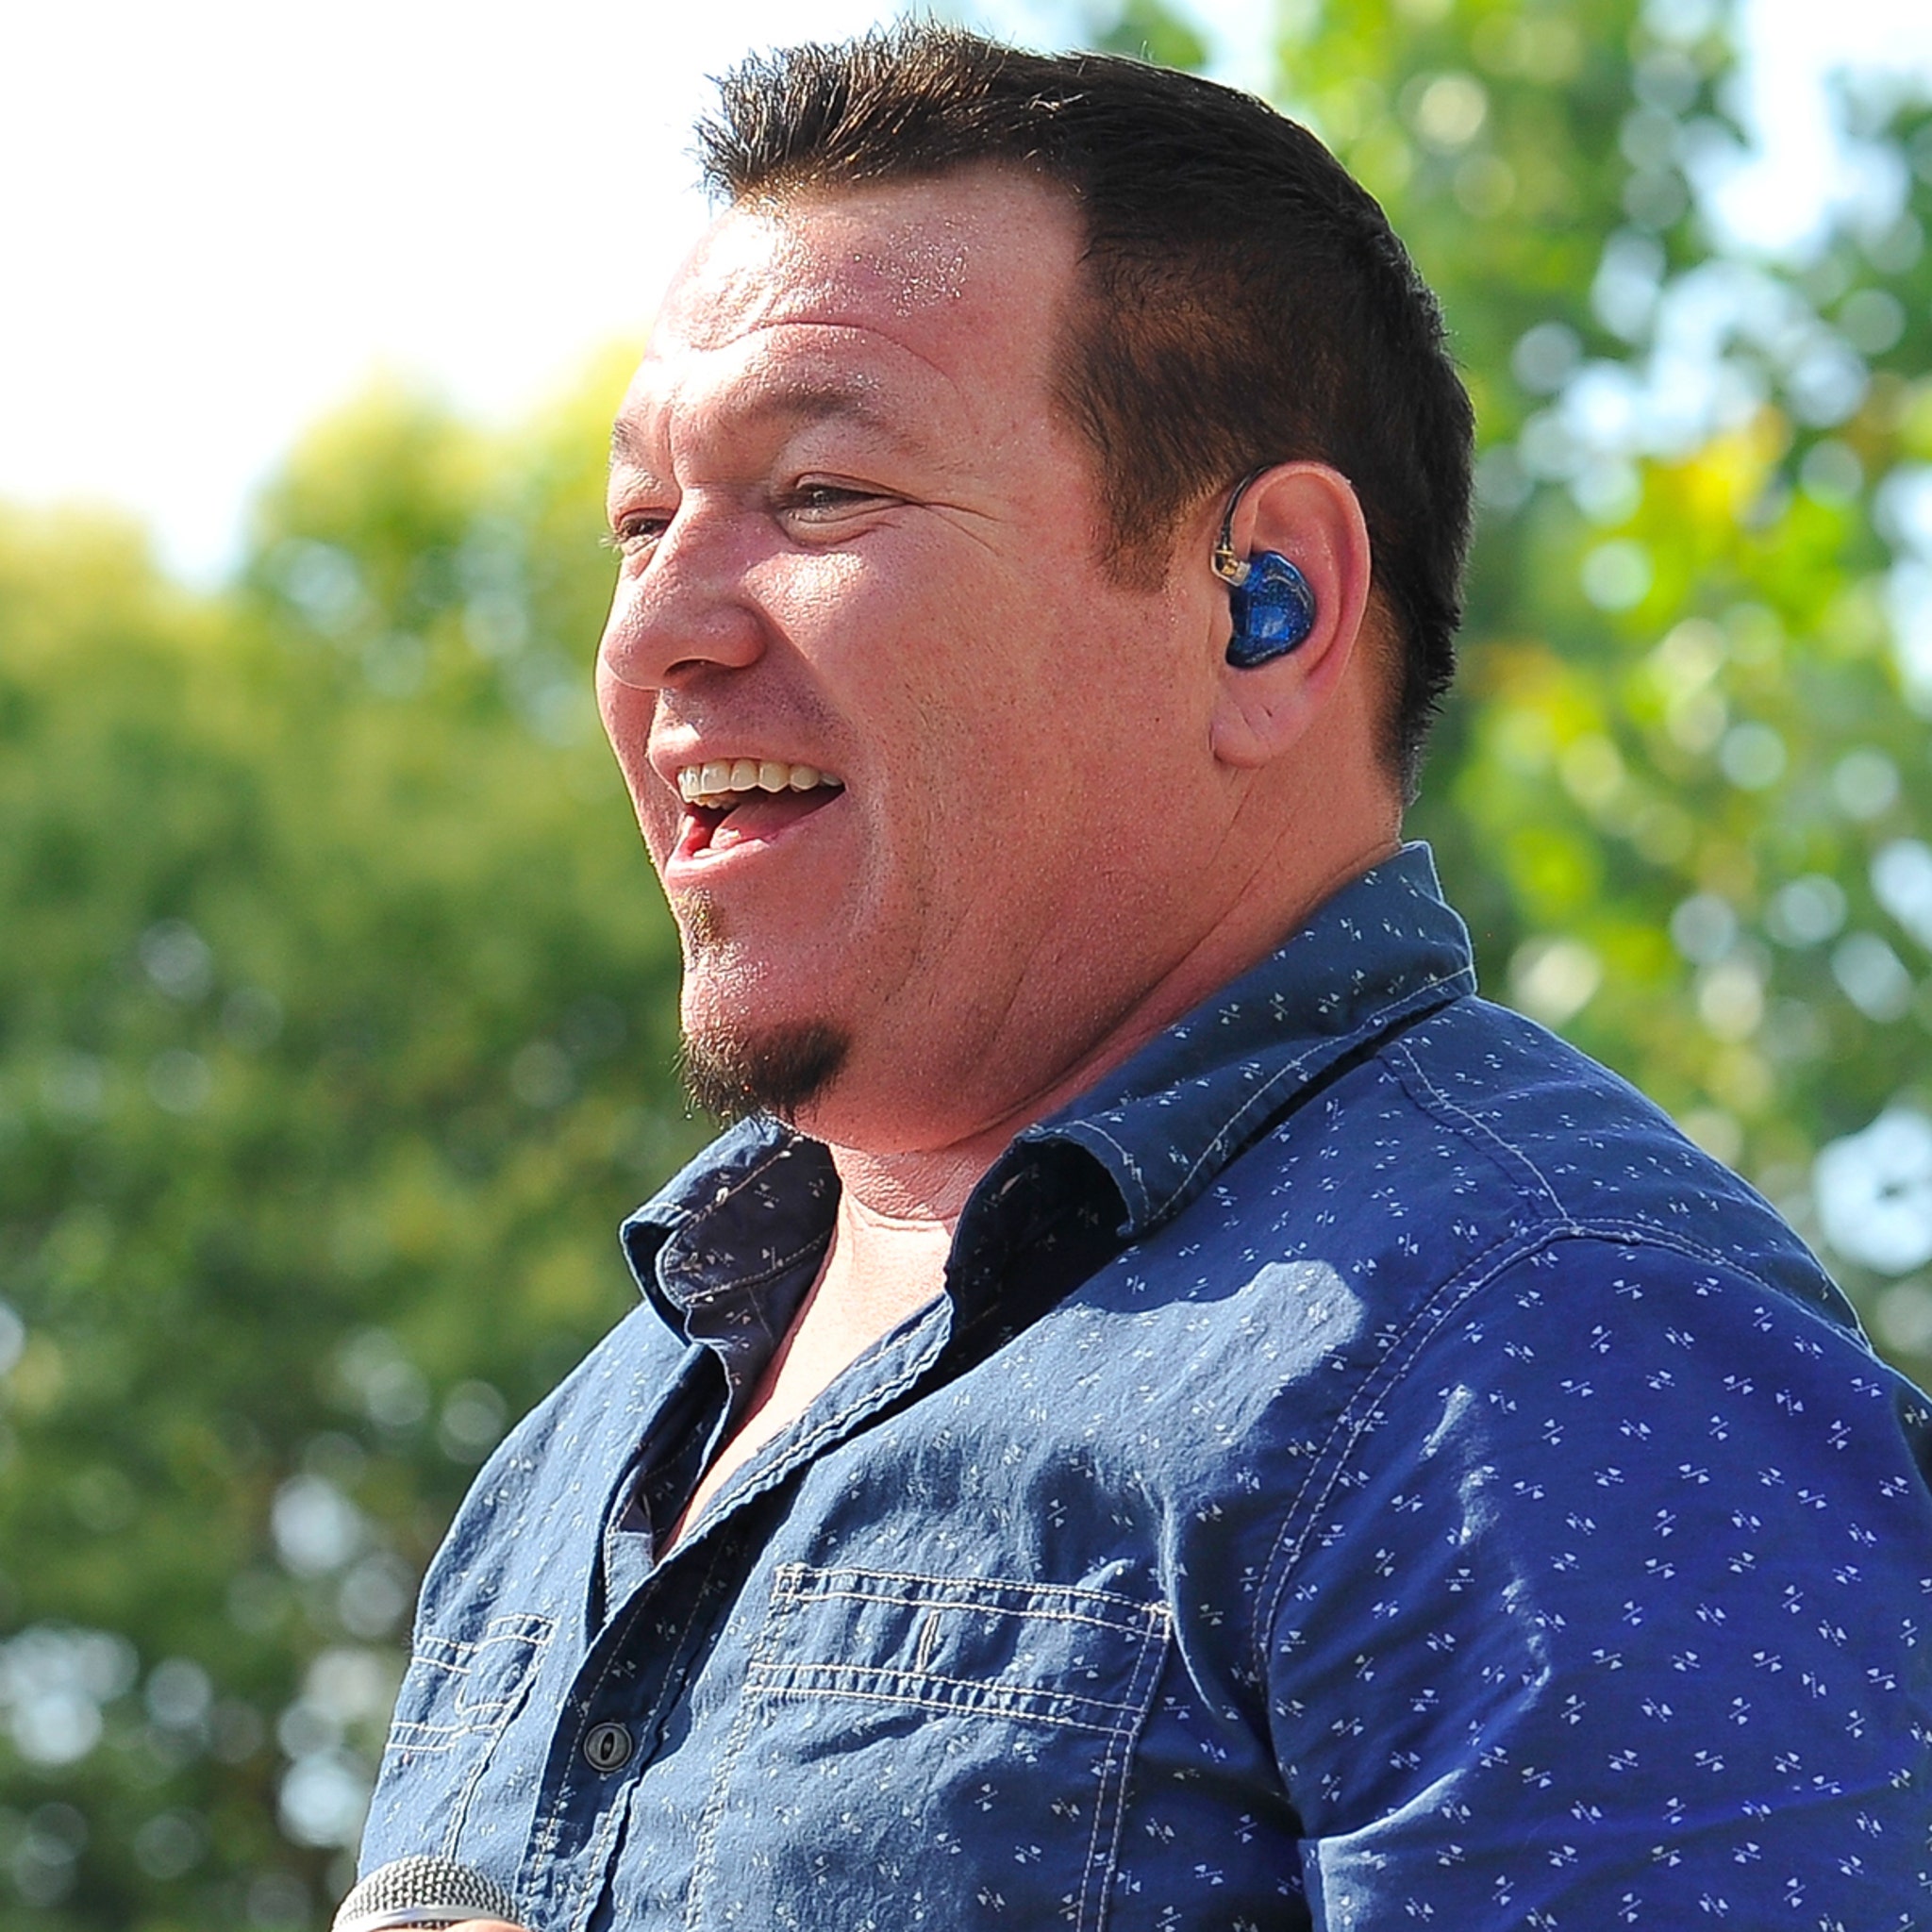 Steve Harwell, the former lead singer of Smash Mouth, has died at 56